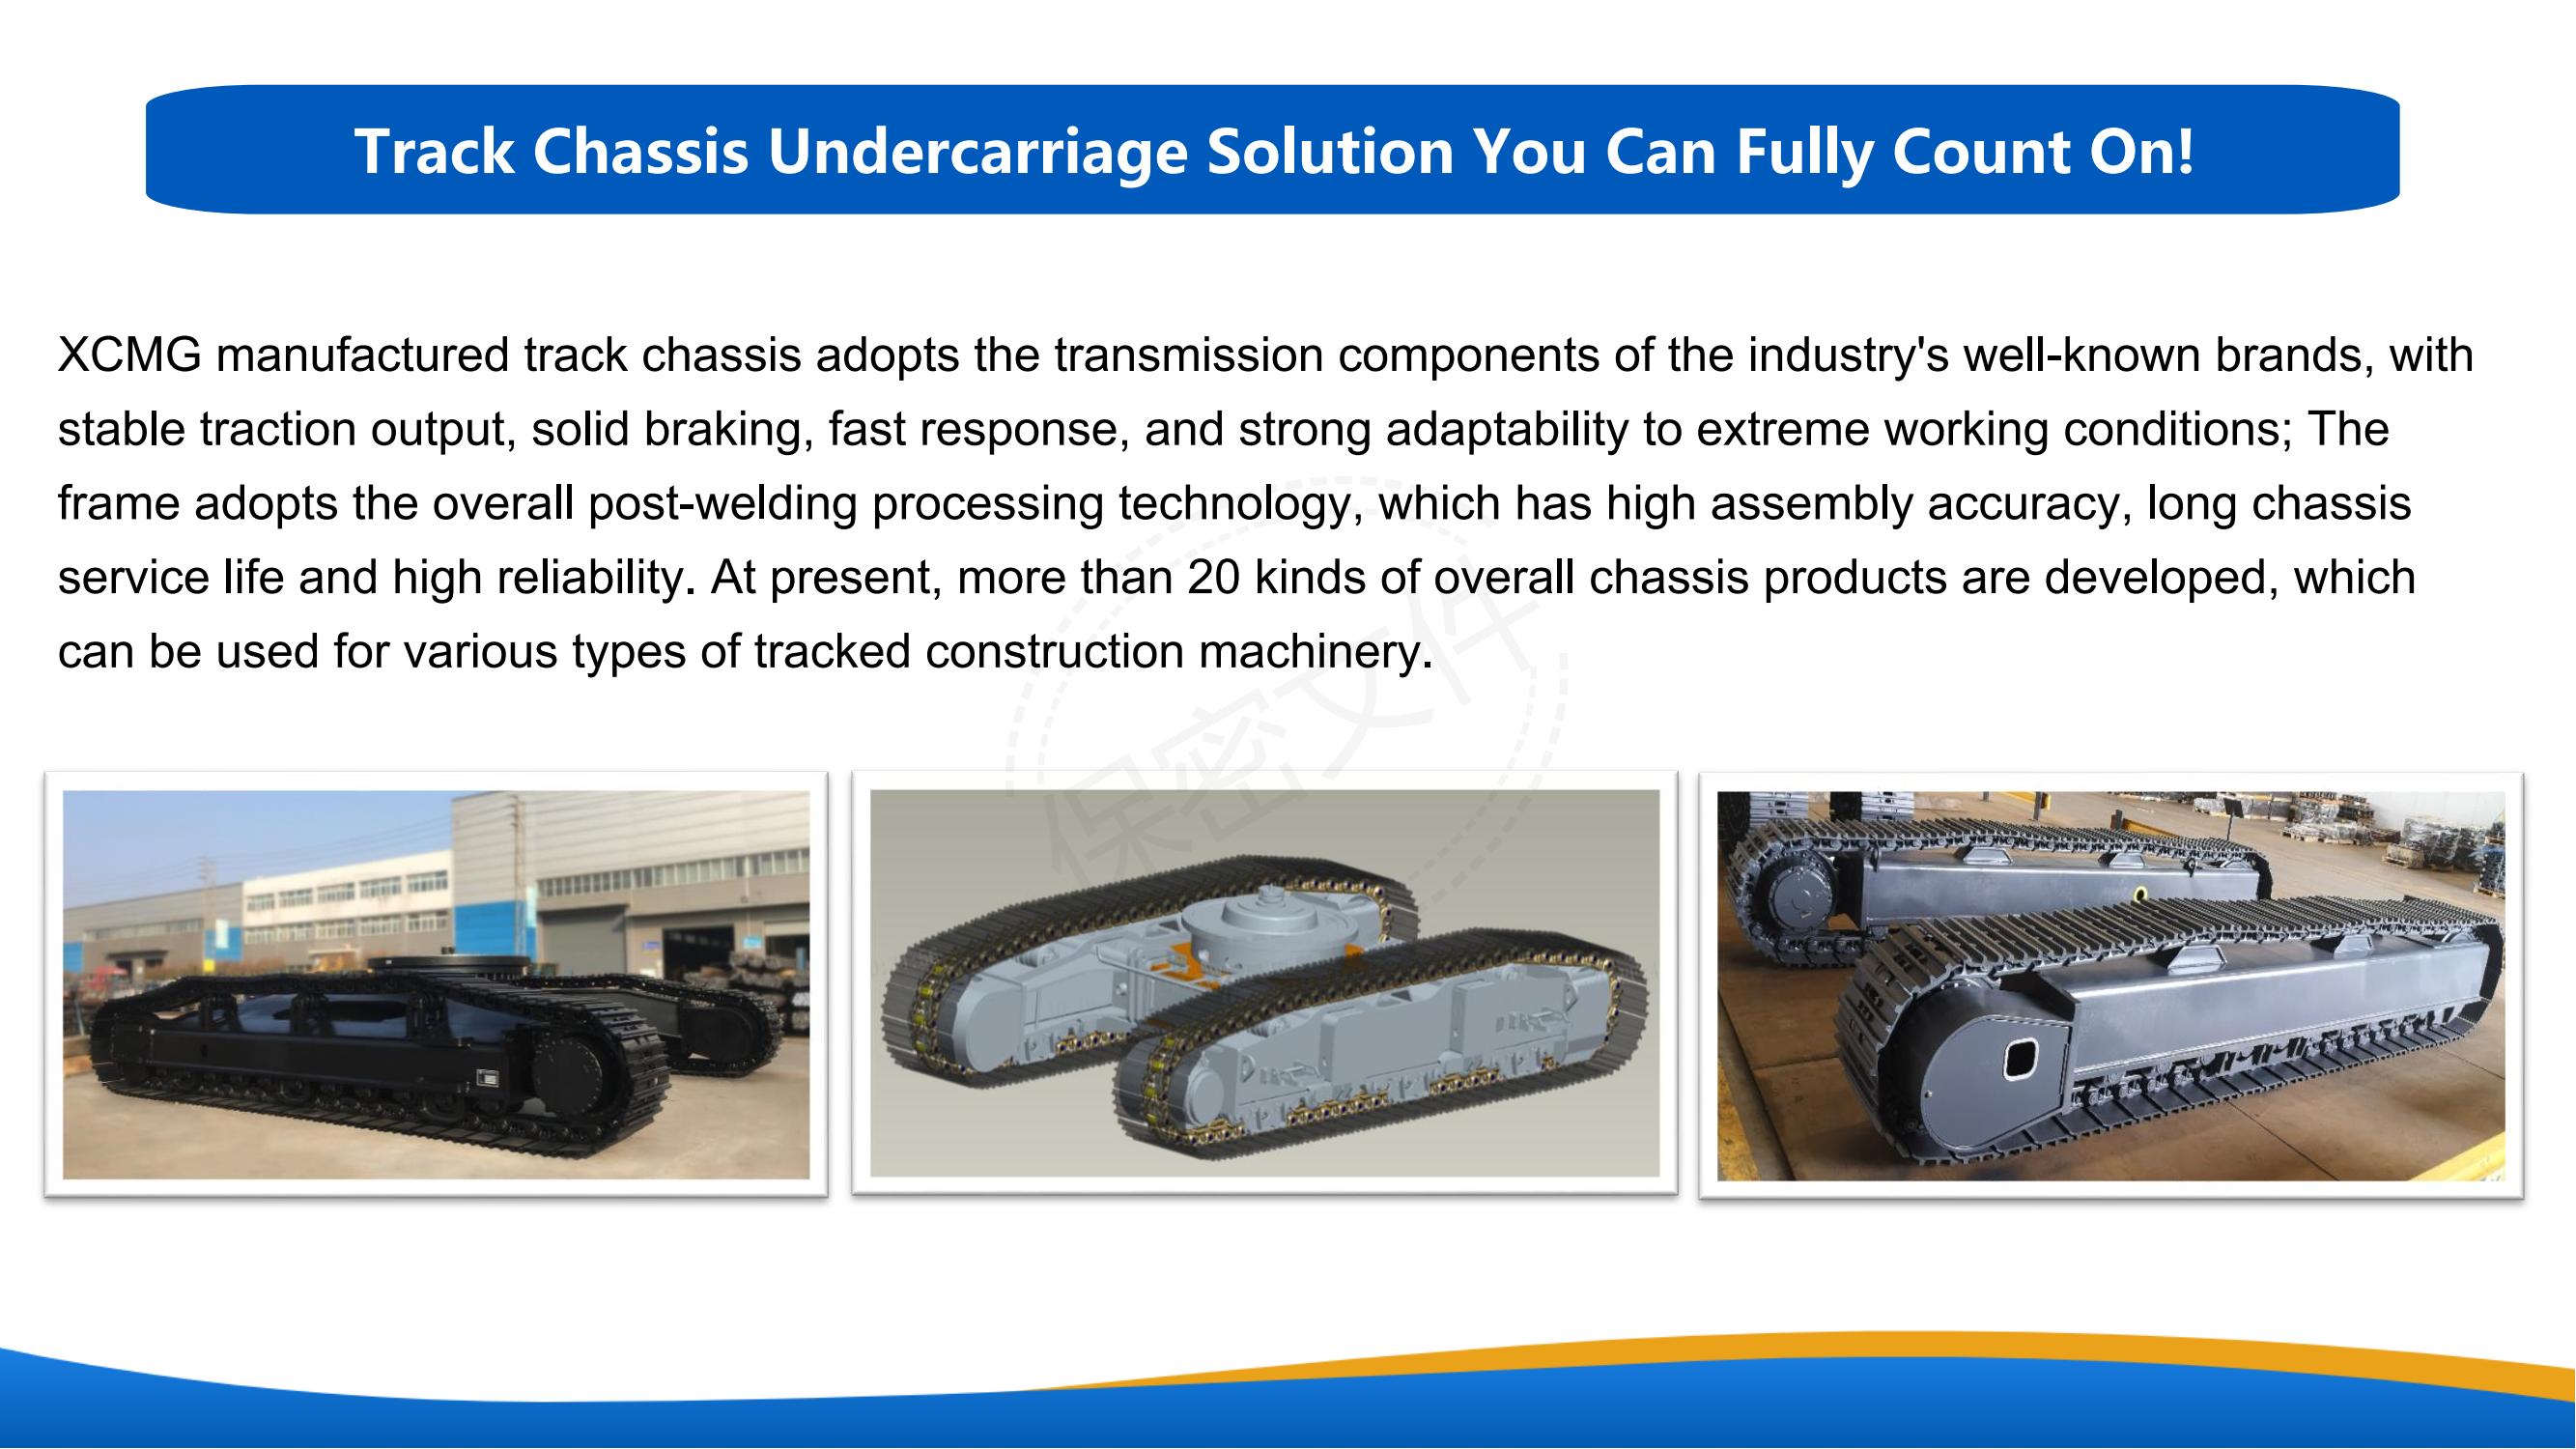 4. undercarriage solution